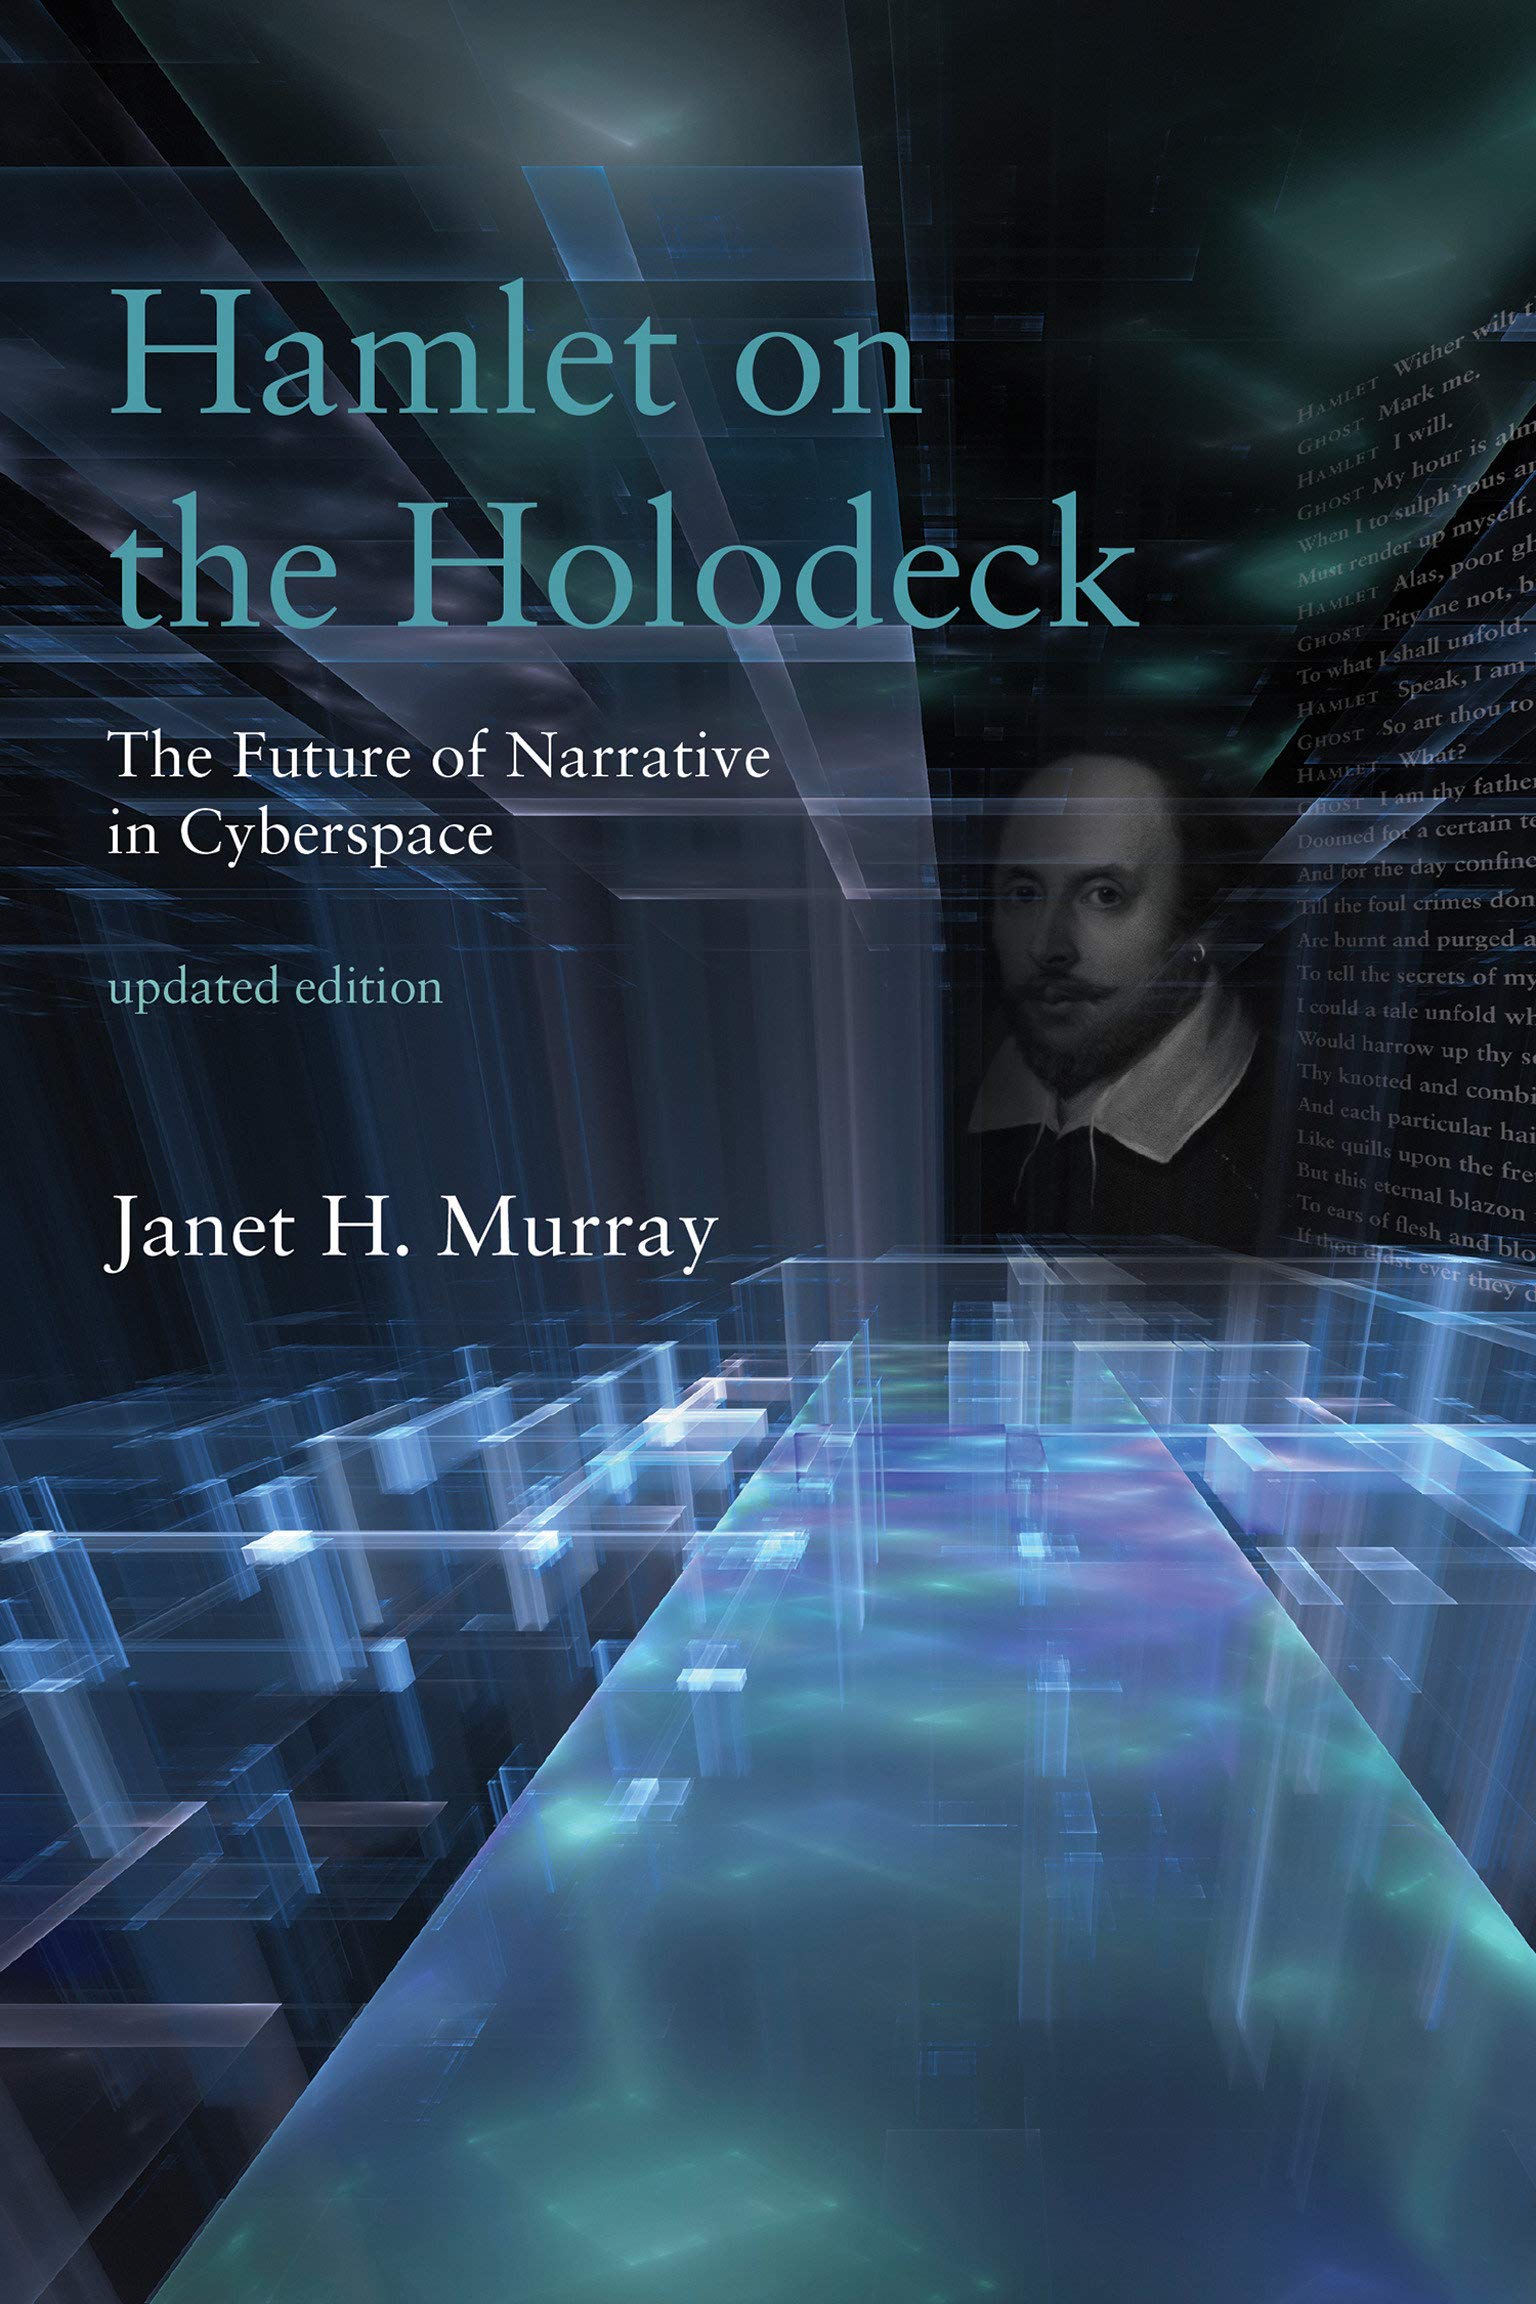 Hamlet on the Holodeck, updated edition: The Future of Narrative in Cyberspace